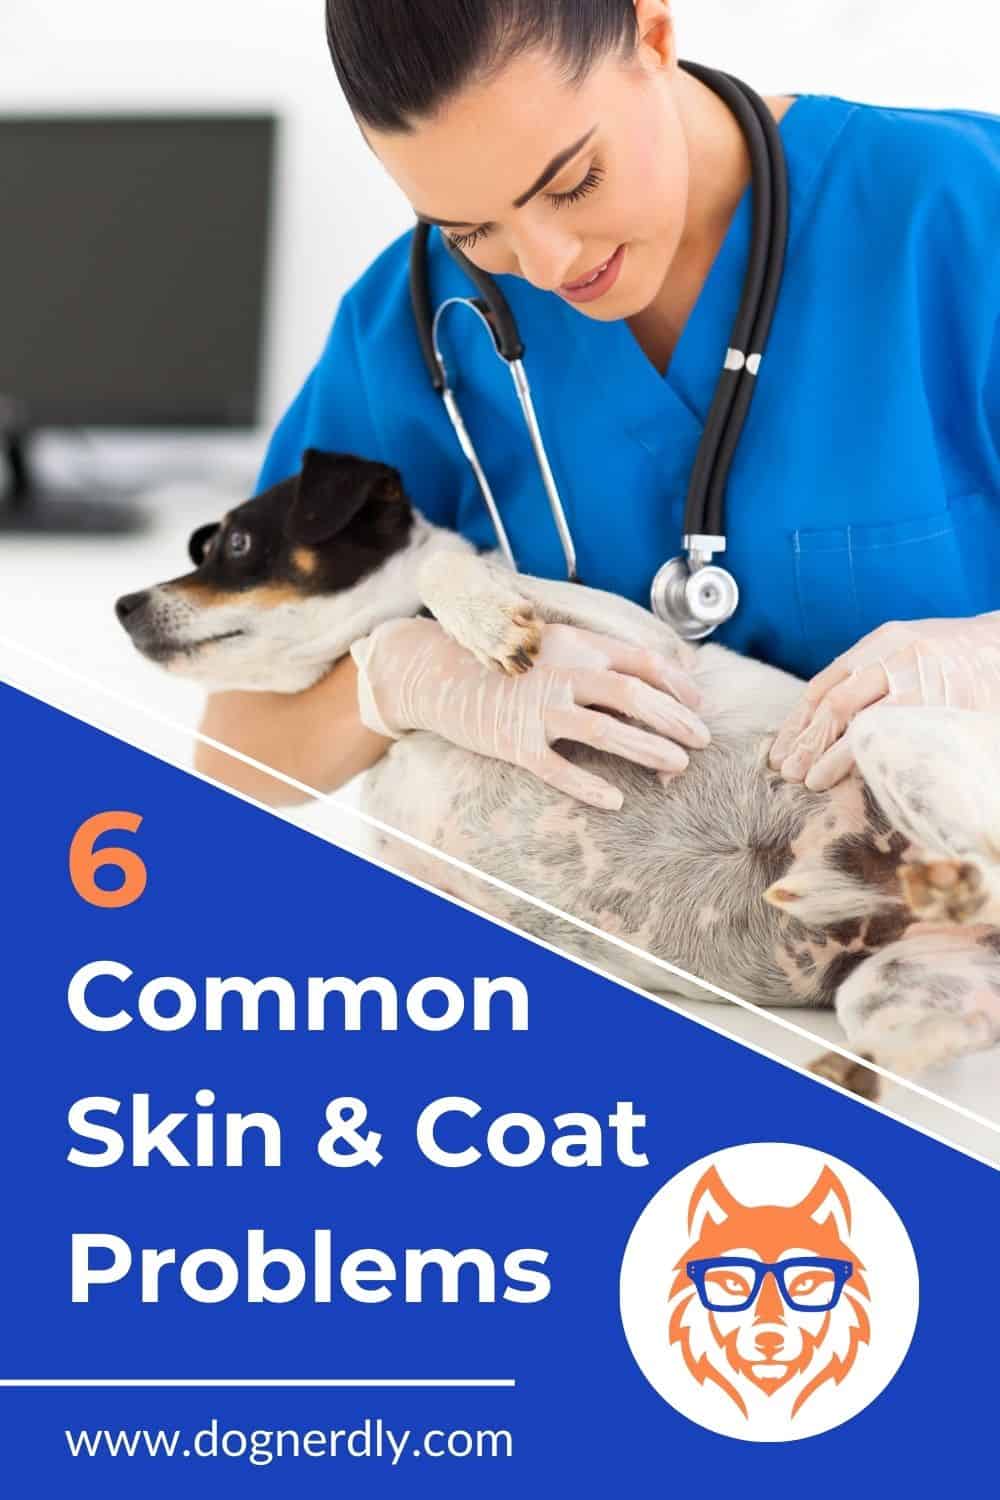 6 Common Skin and Coat Problems in Dogs: How to Recognize and Treat